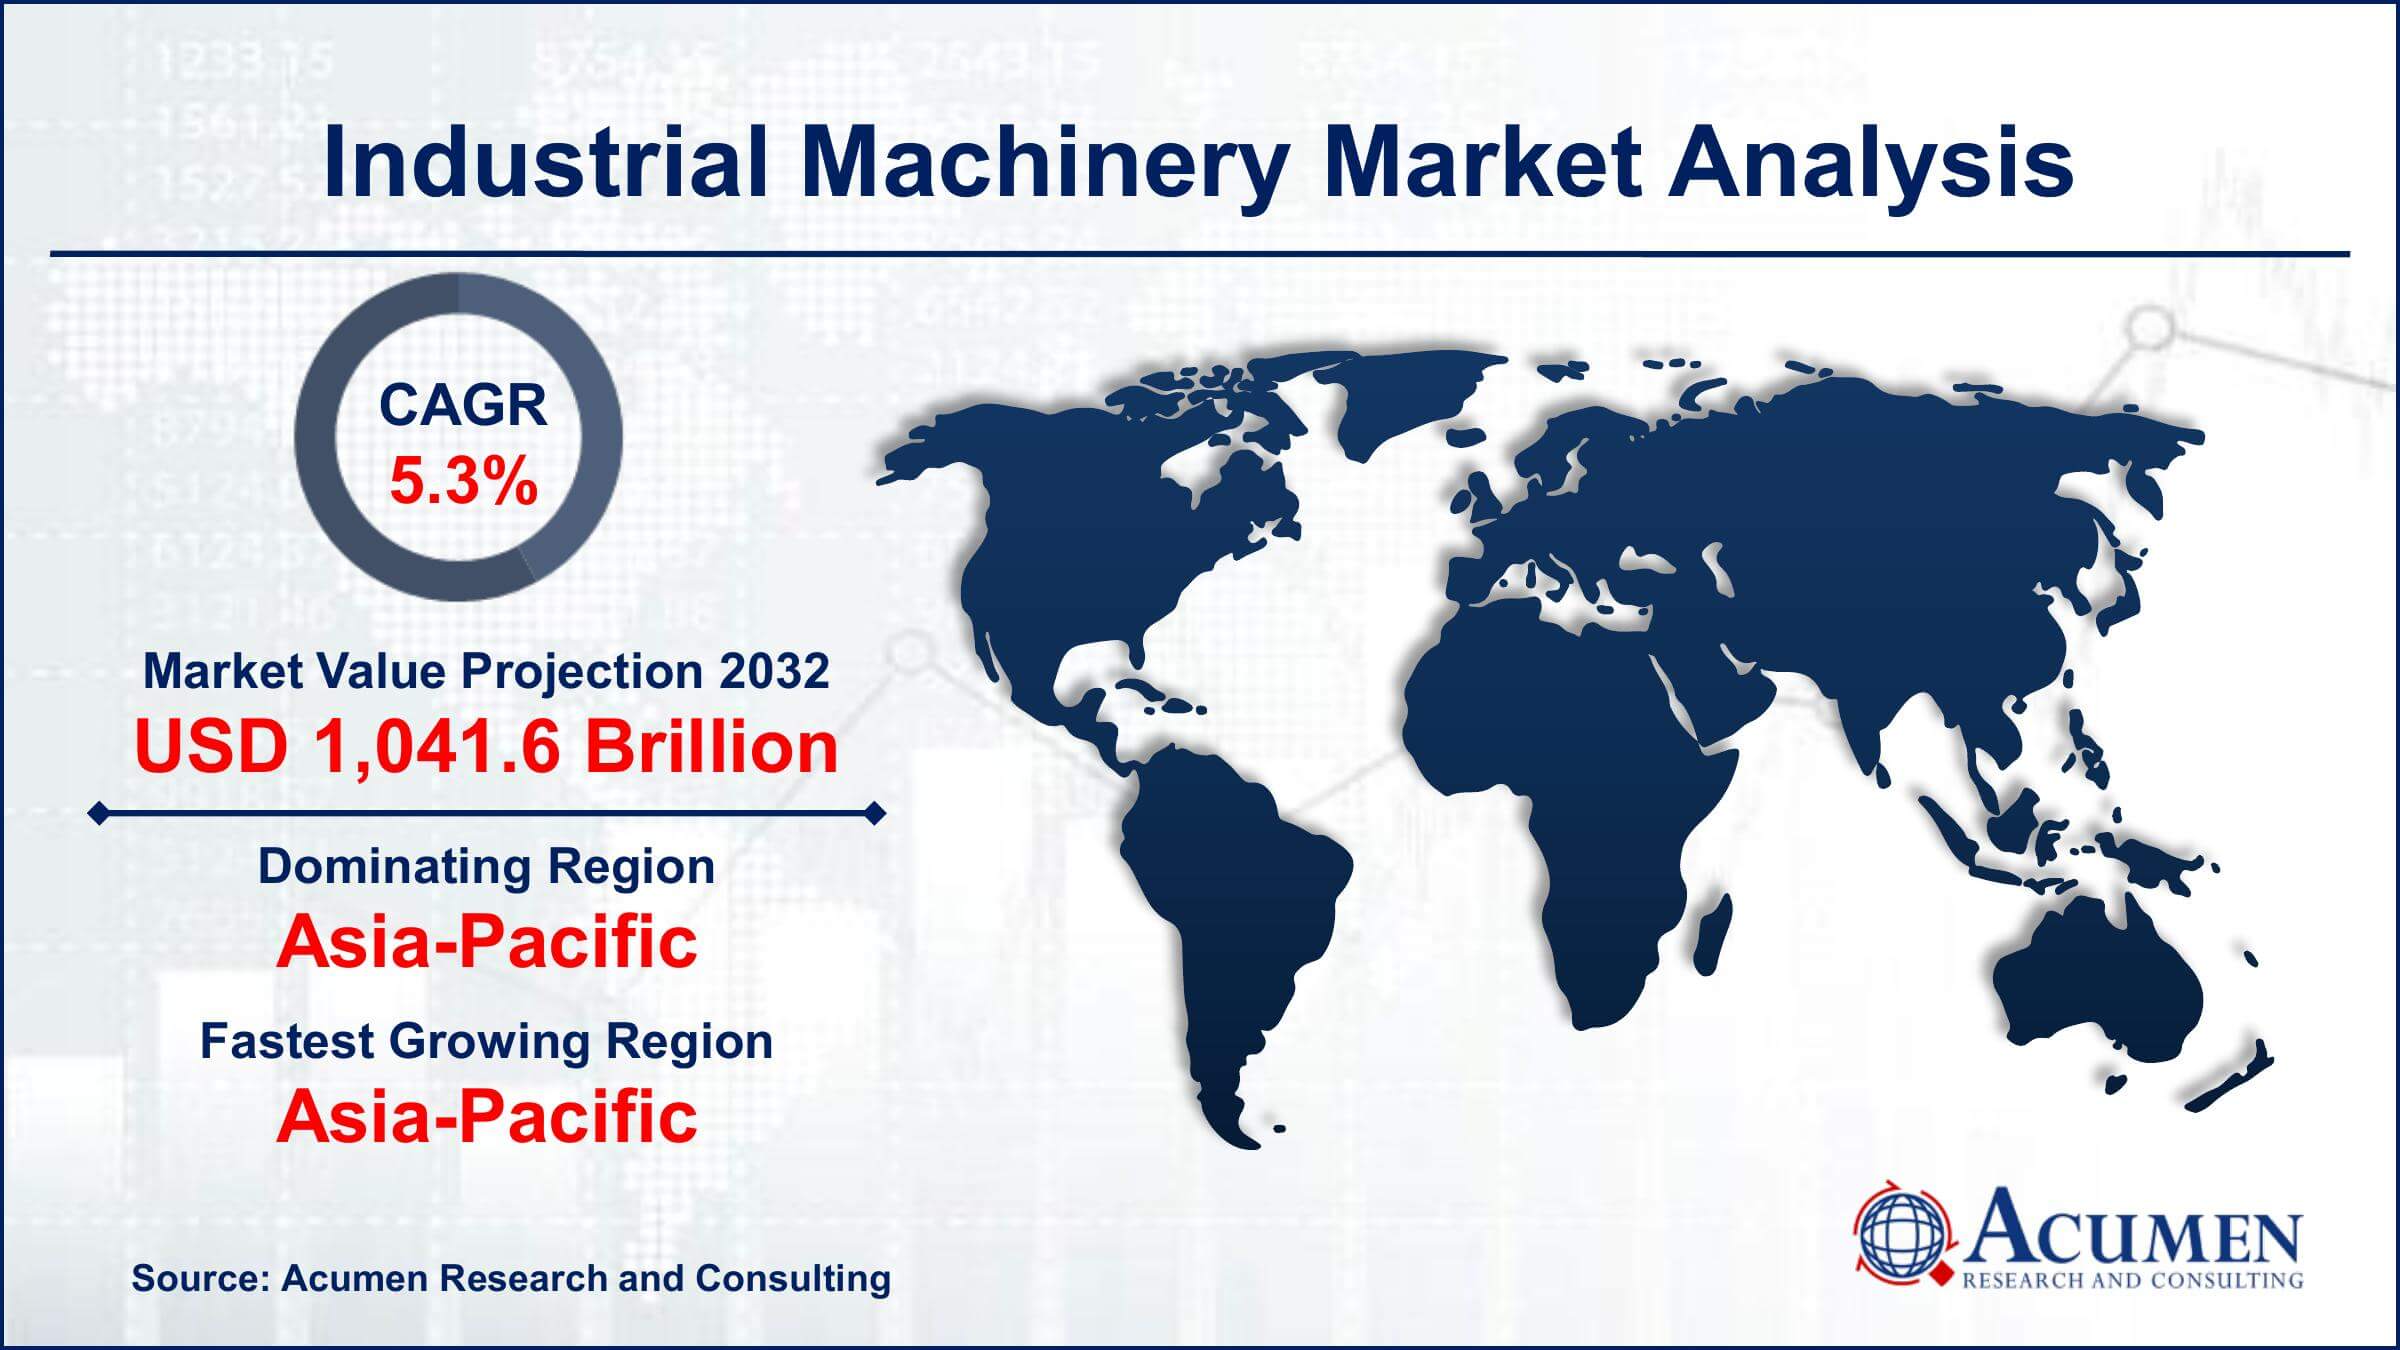 Global Industrial Machinery Market Trends